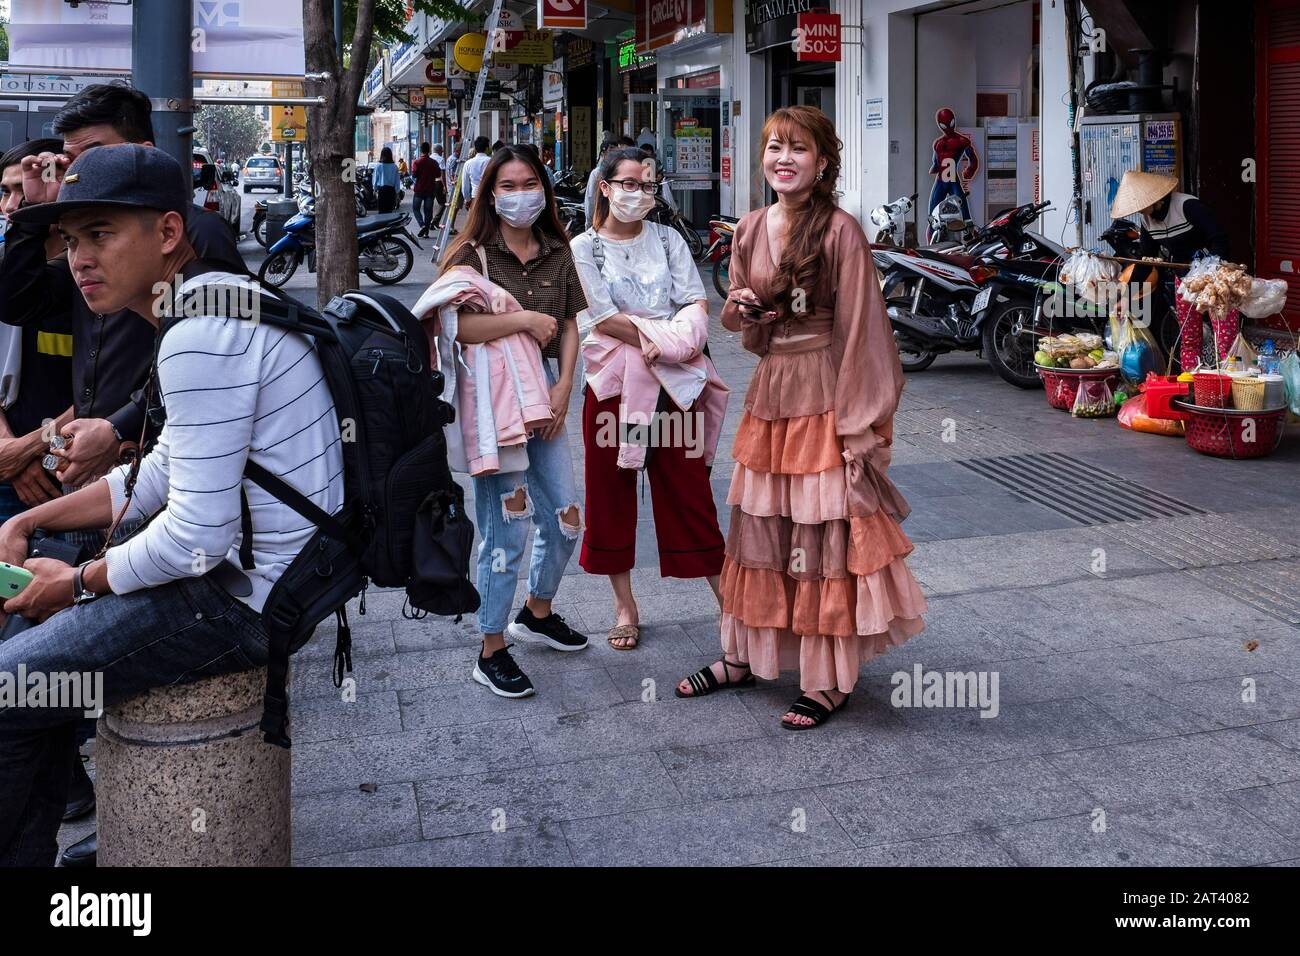 Group of young people on the street, Ho Chi Minh City, Vietnam Stock Photo